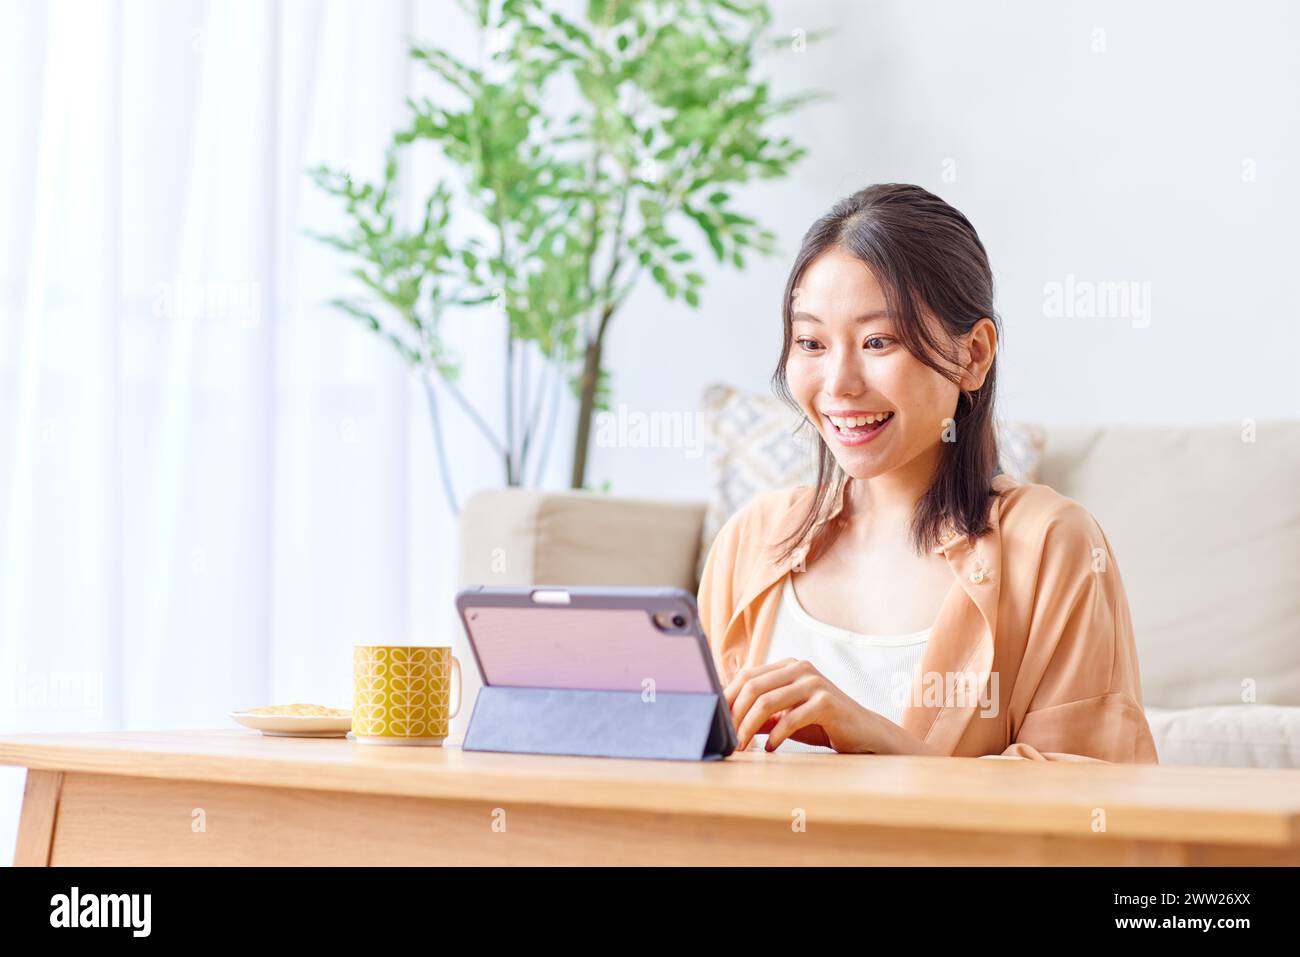 Asian woman using tablet computer in living room Stock Photo